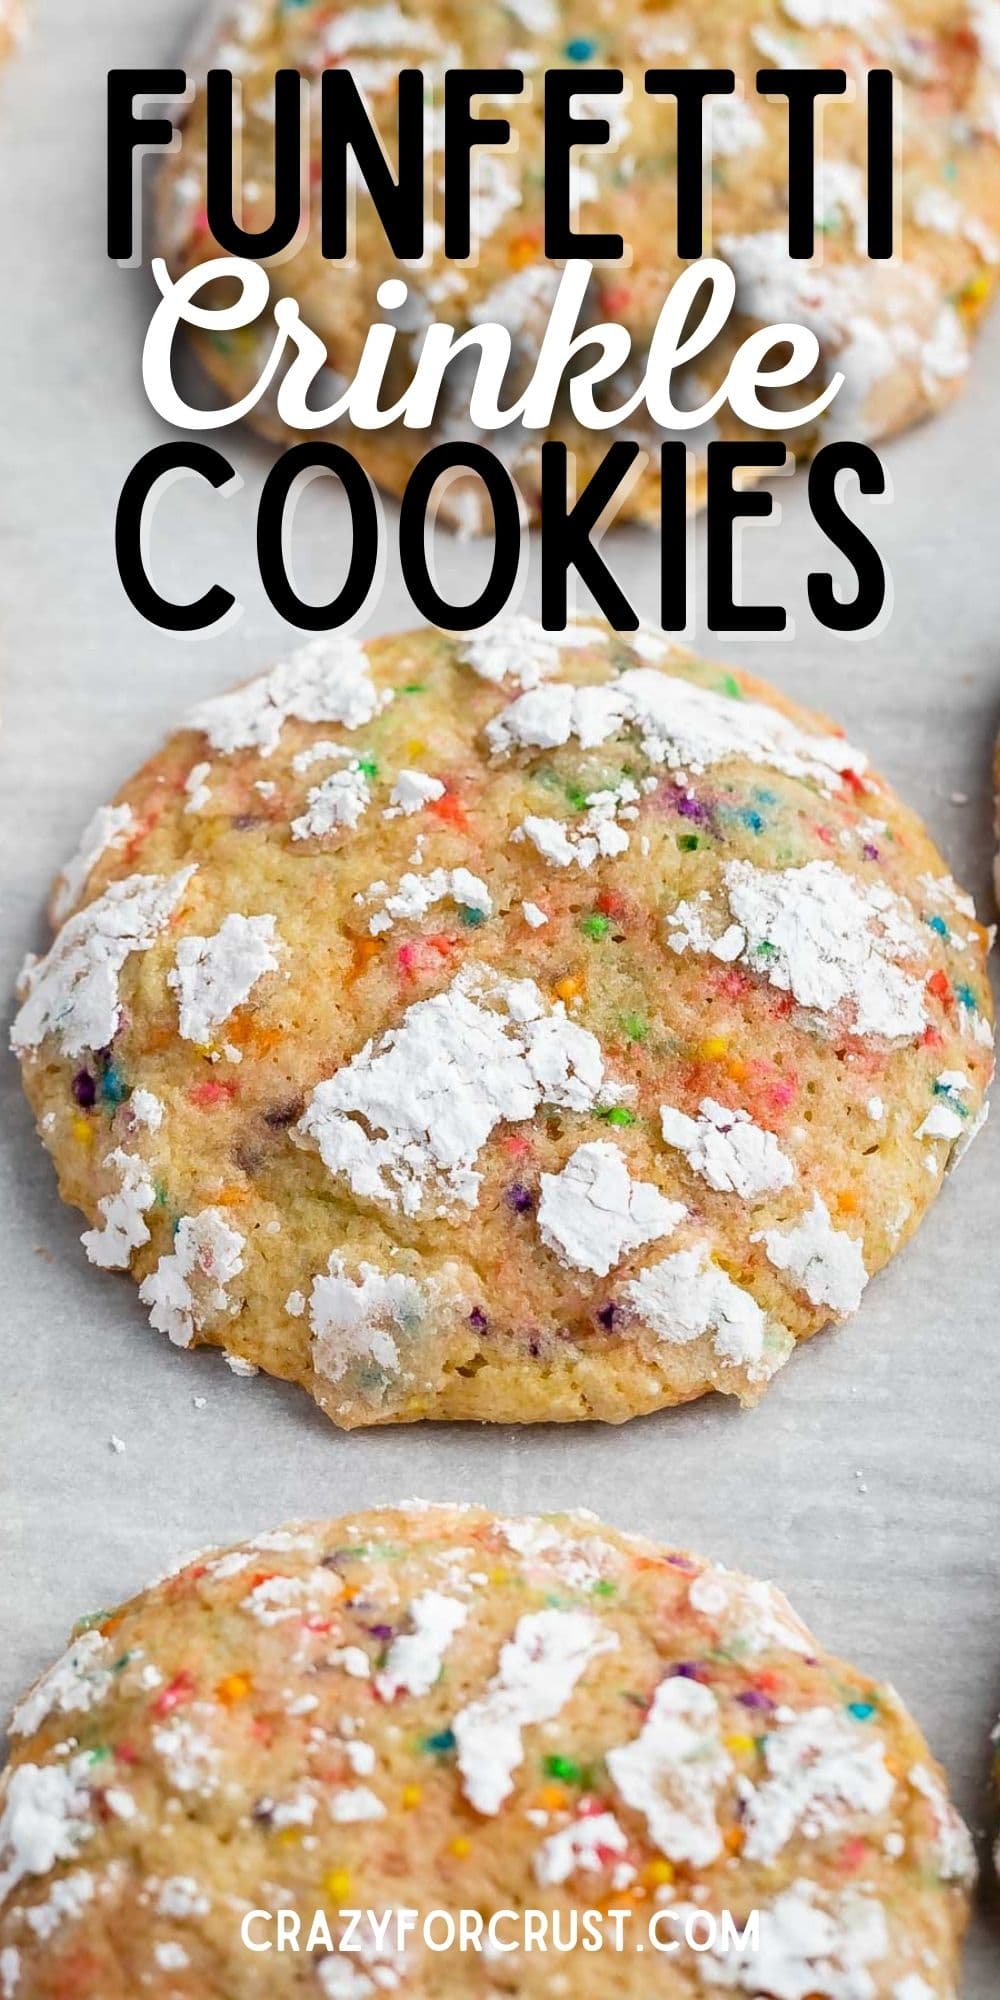 Three funfetti crackle cookies with recipe title on top of image